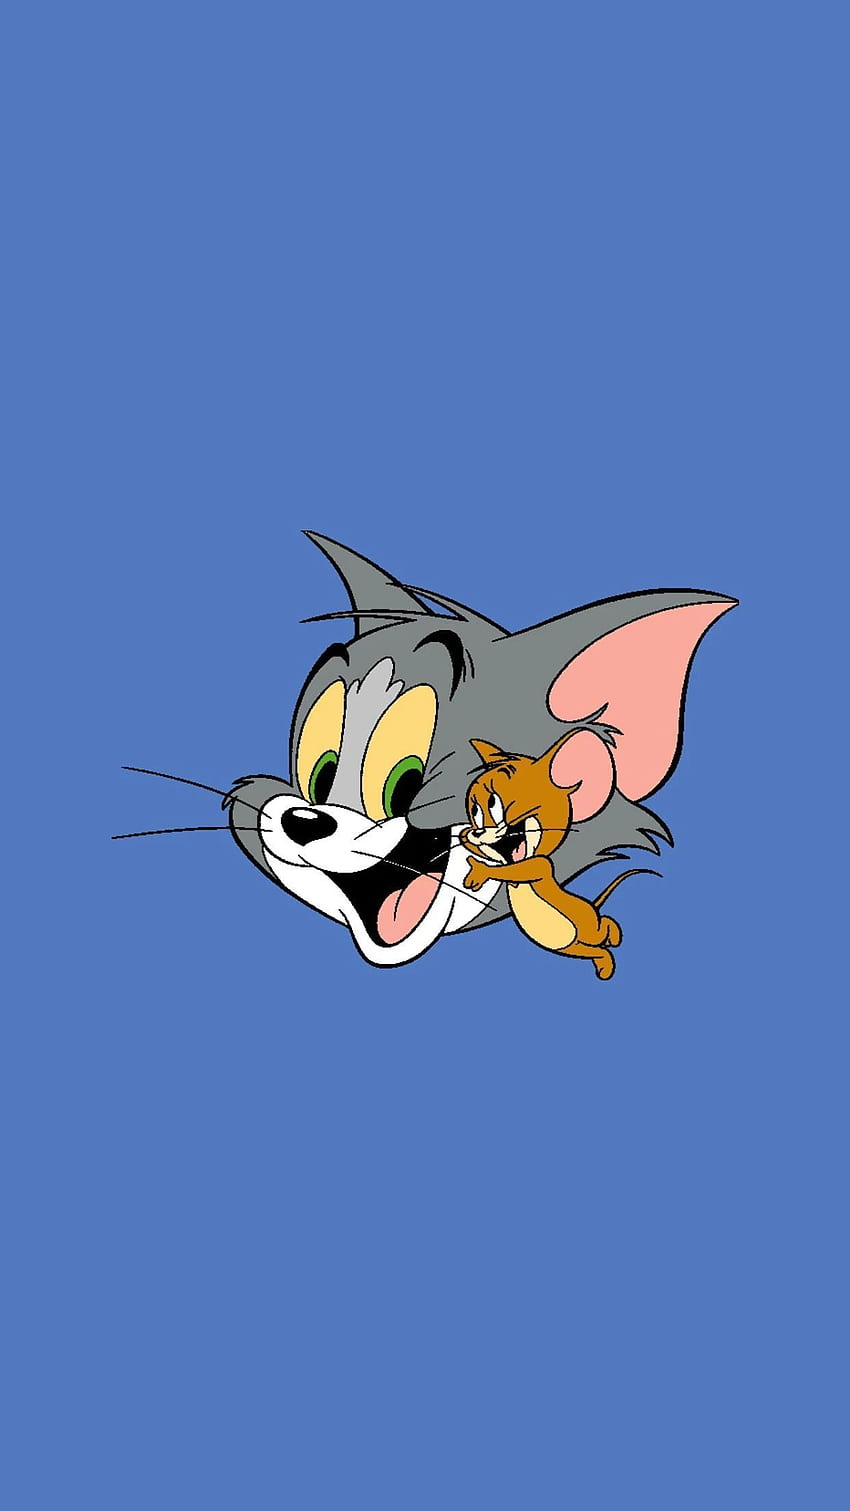 Phone to Commemorate Tom and Jerry's Animator Gene Deitch. Tom and jerry, Tom and jerry, Tom and jerry, Cute Tom and Jerry HD phone wallpaper